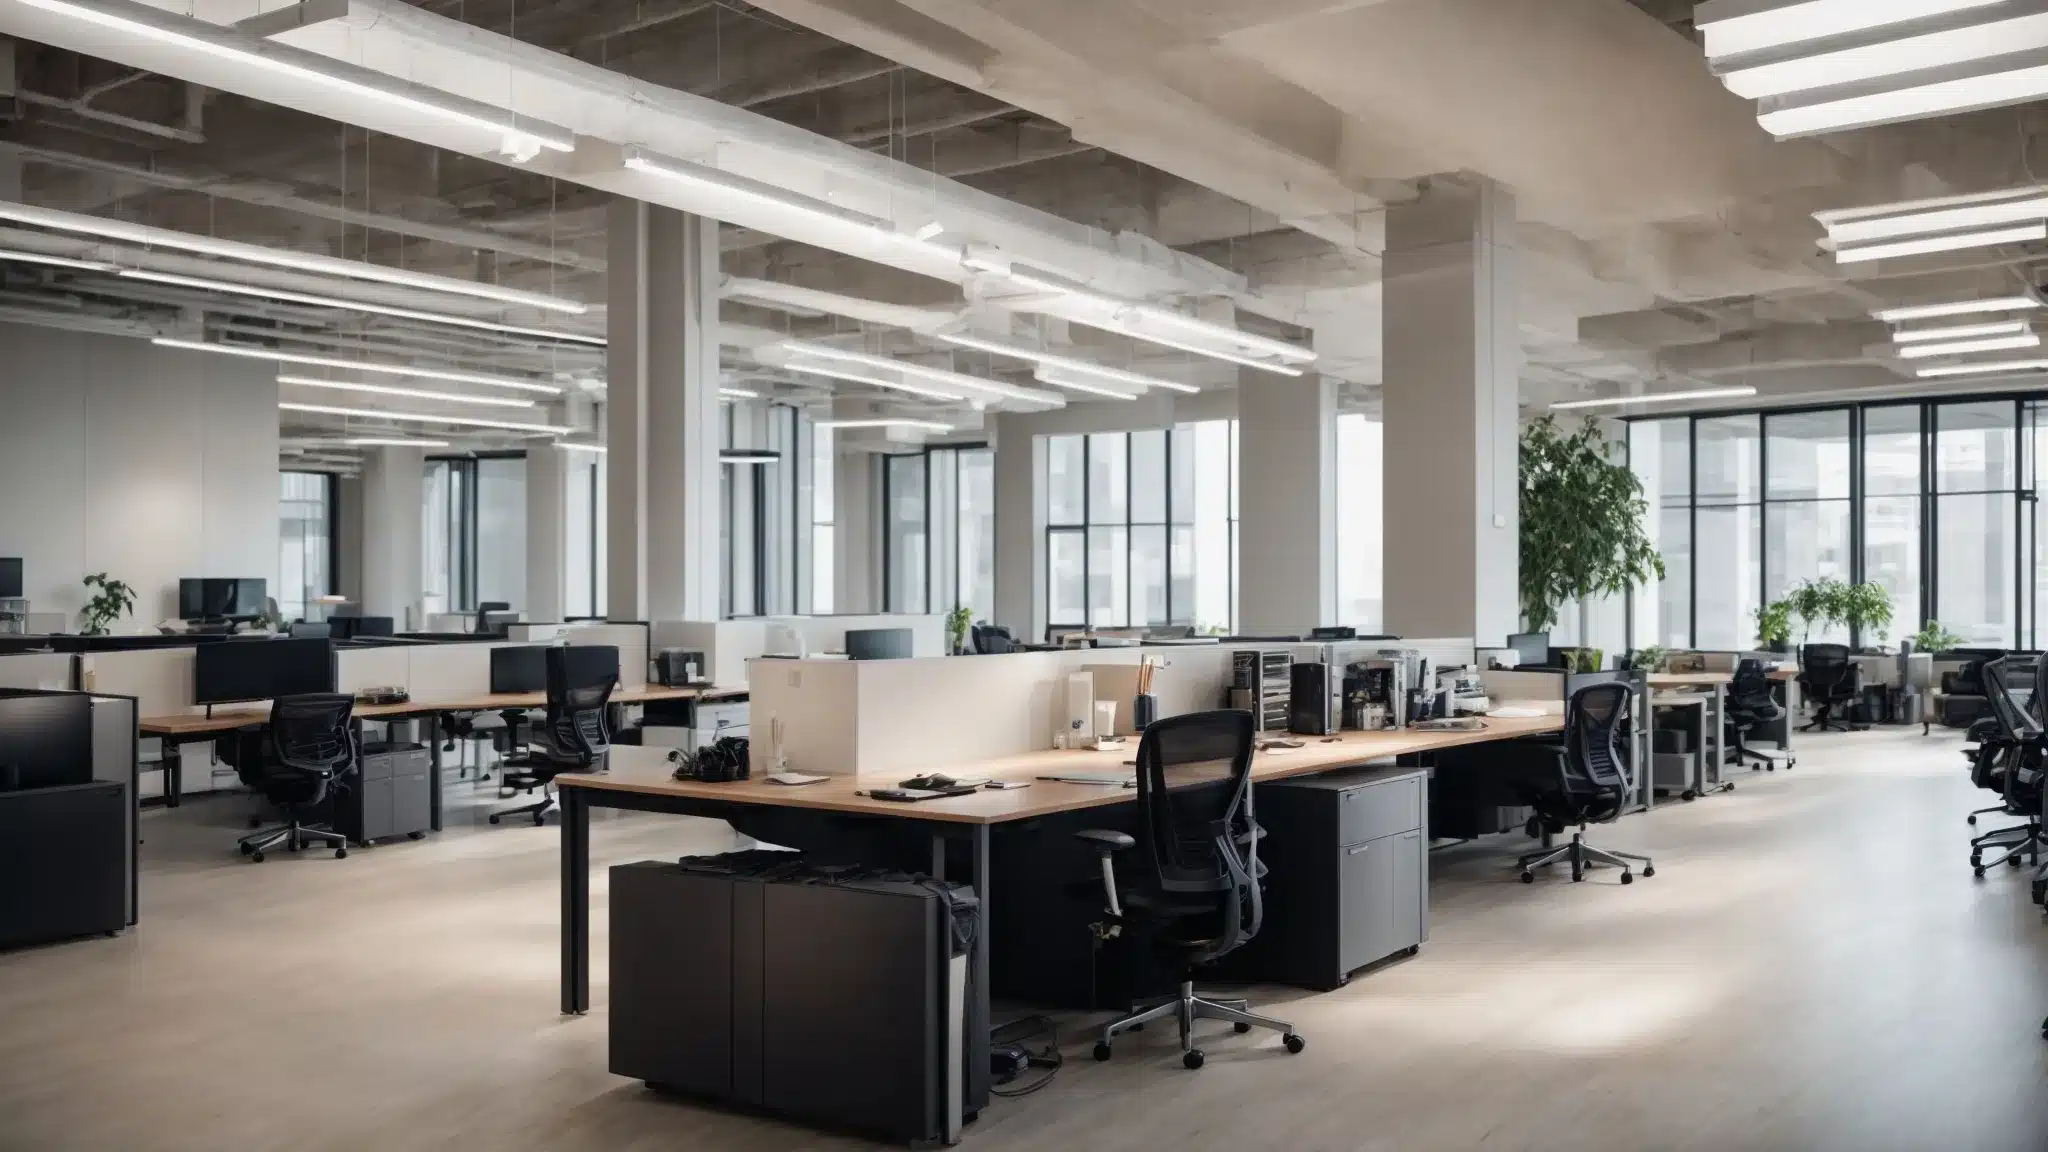 A Modern Office Space Filled With Ergonomic Chairs And Spacious Desks Under Bright, Natural Lighting.